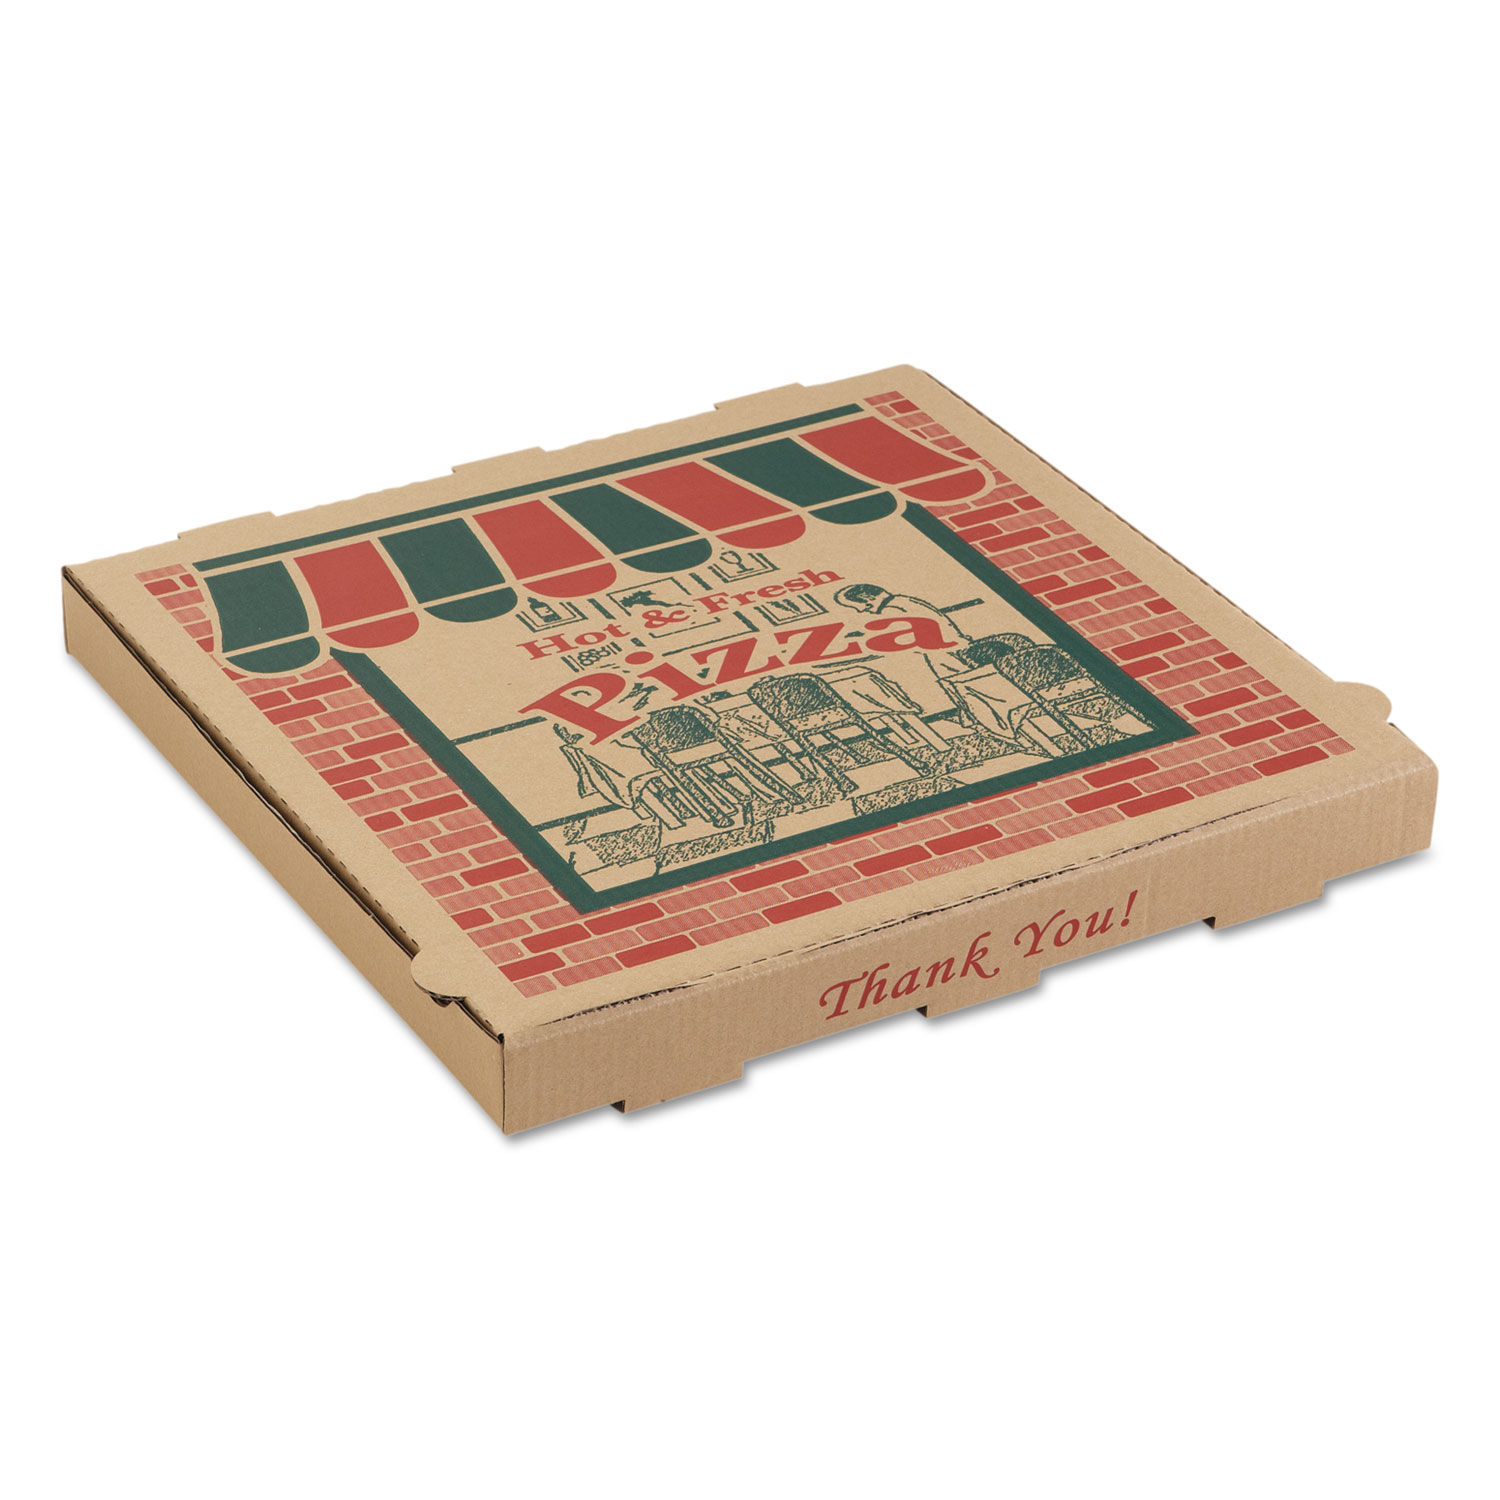 Pizza Boxes Archives - Canada Brown